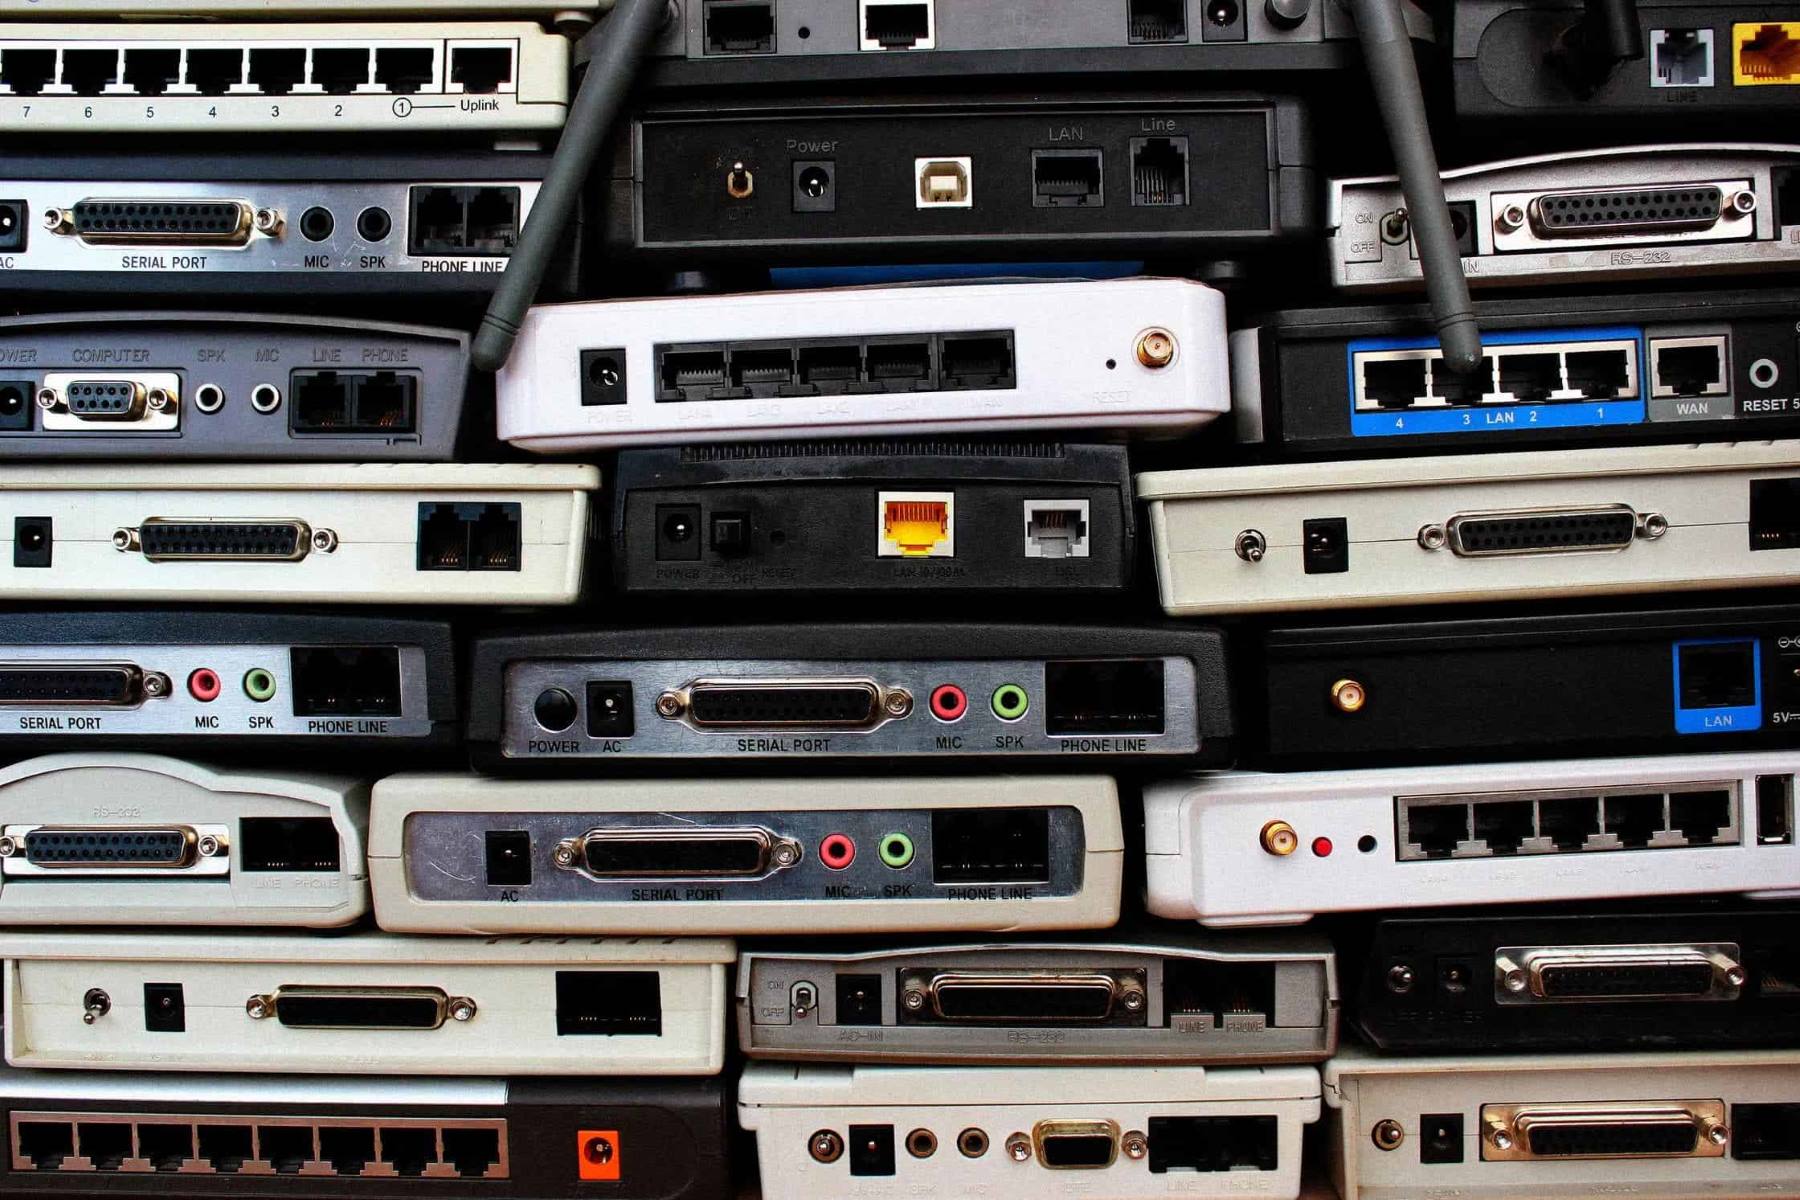 Where To Recycle Old Routers